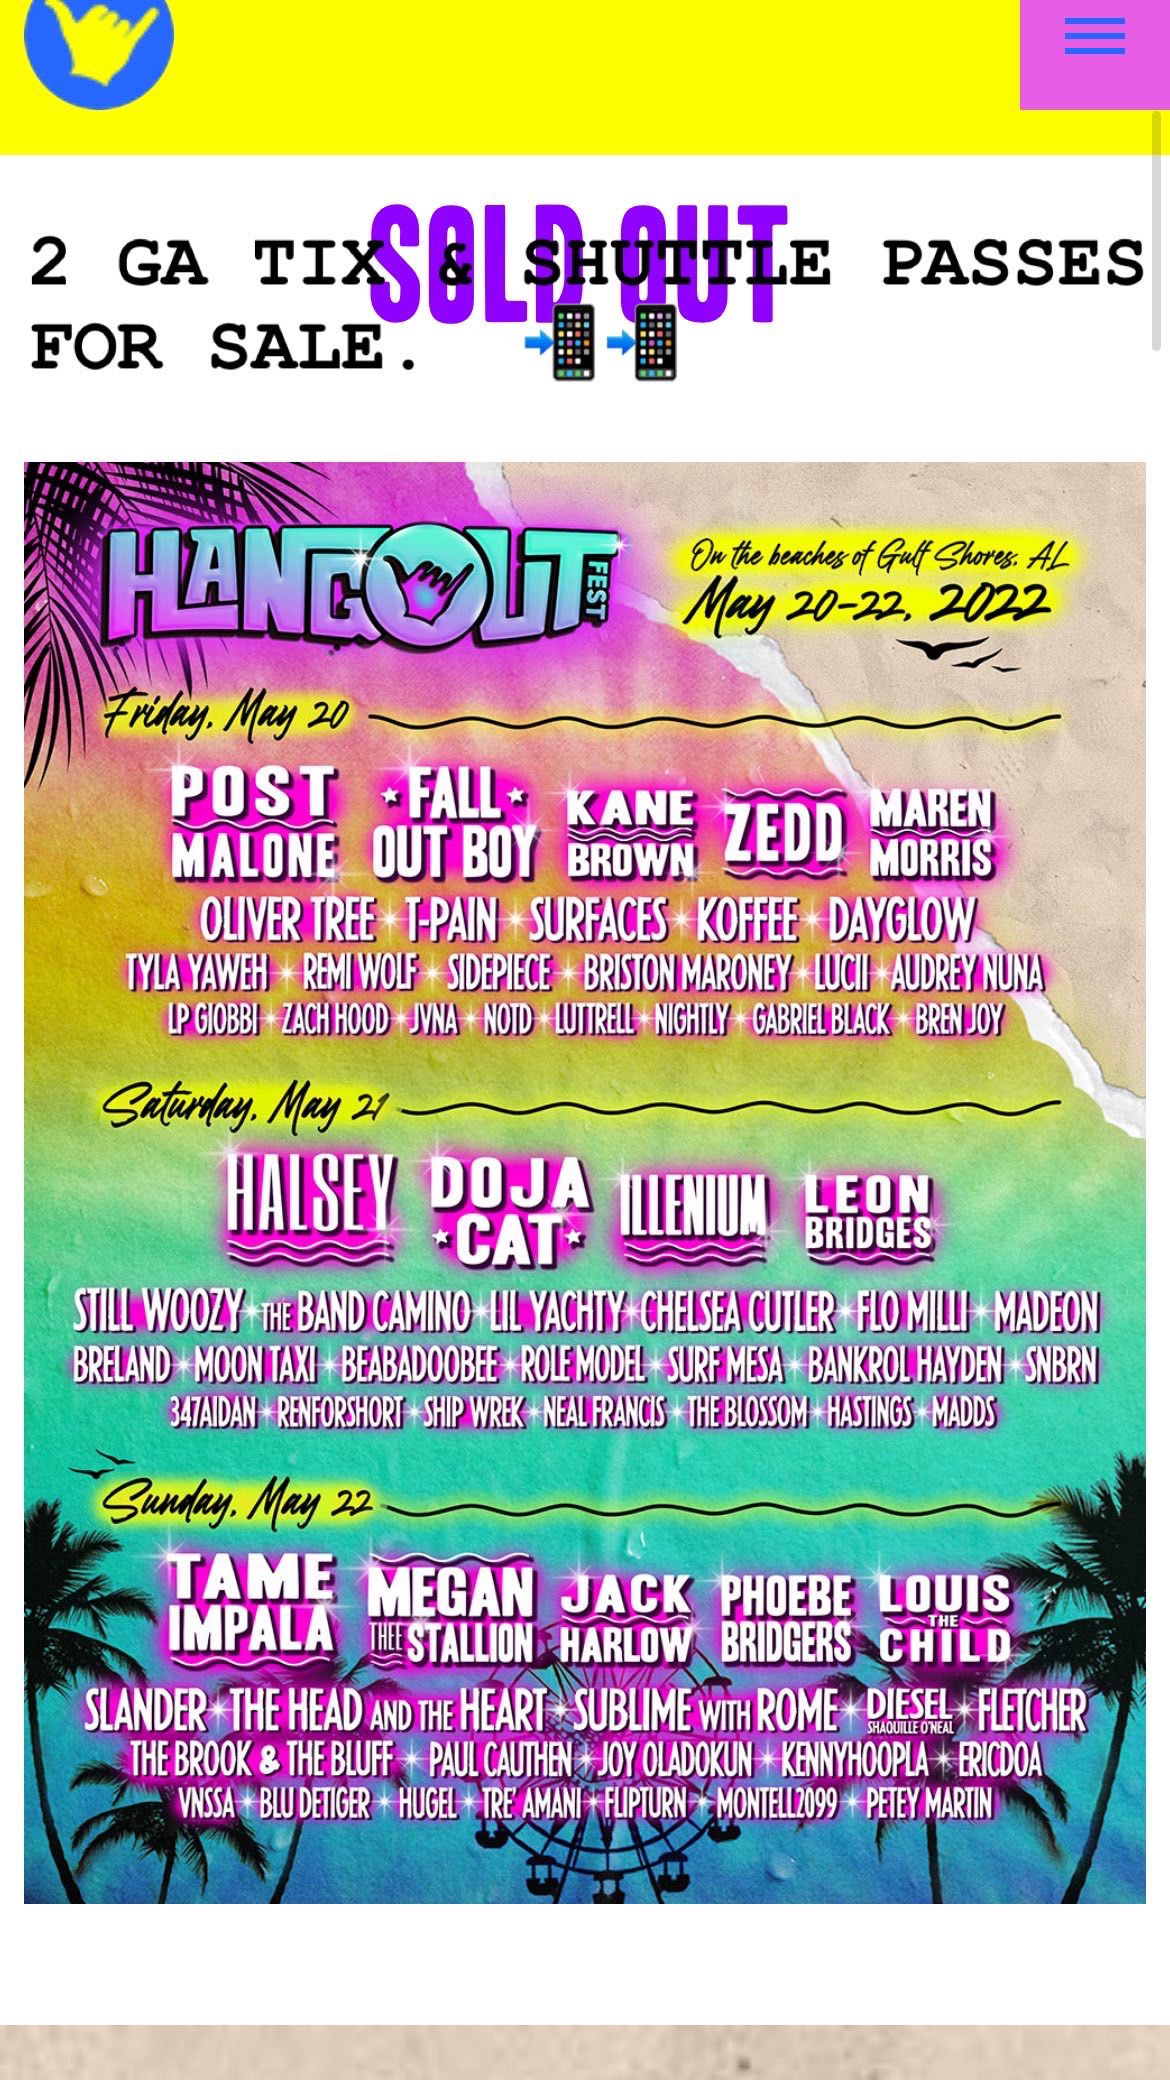 2 Hangout Fest 2022 Tickets with Transportation Pass